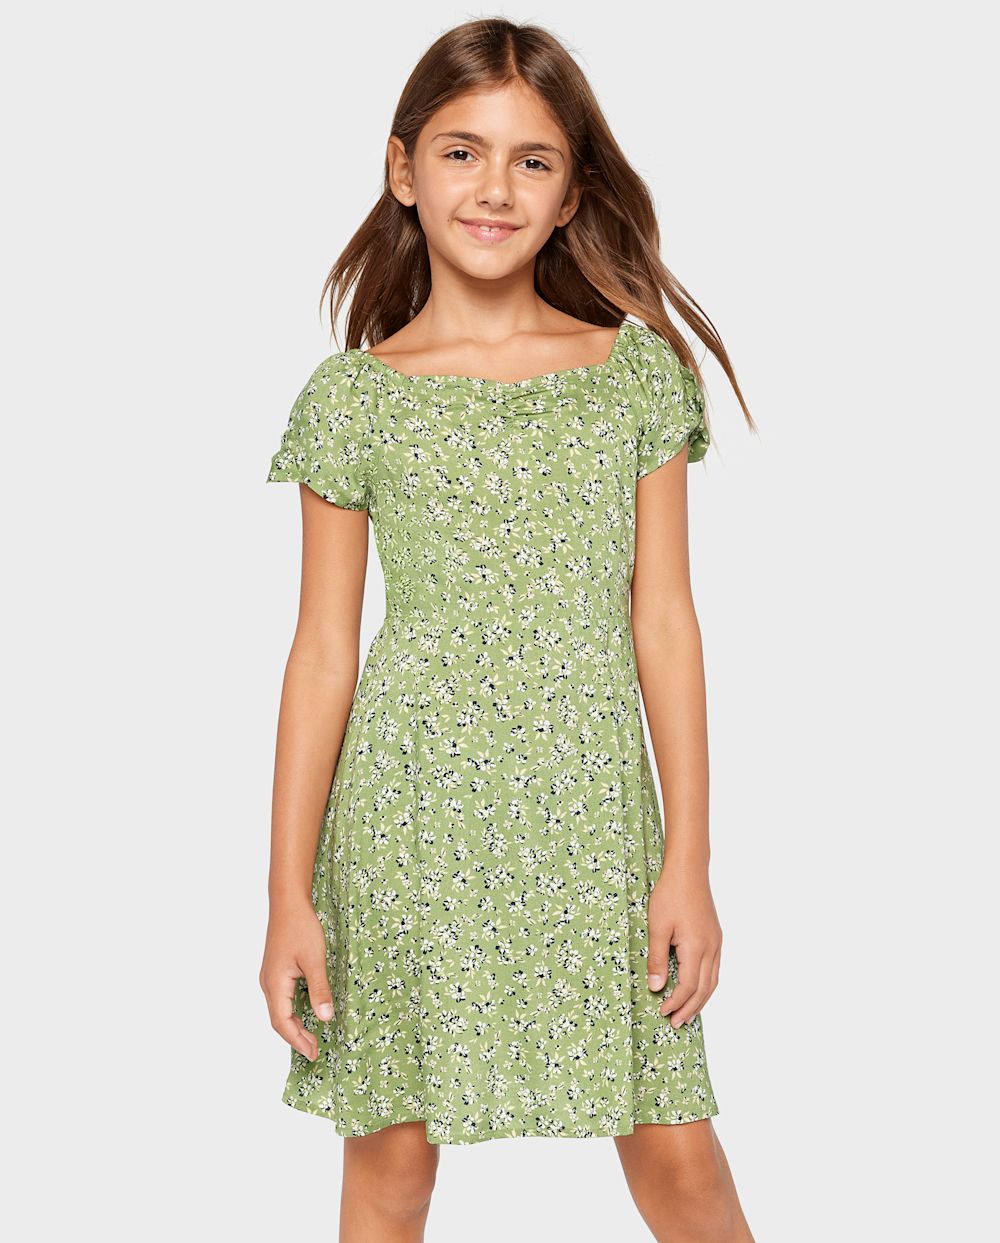 Girls V-neck Ruched Floral Print Rayon Smocked Short Sleeves Sleeves Above the Knee Dress